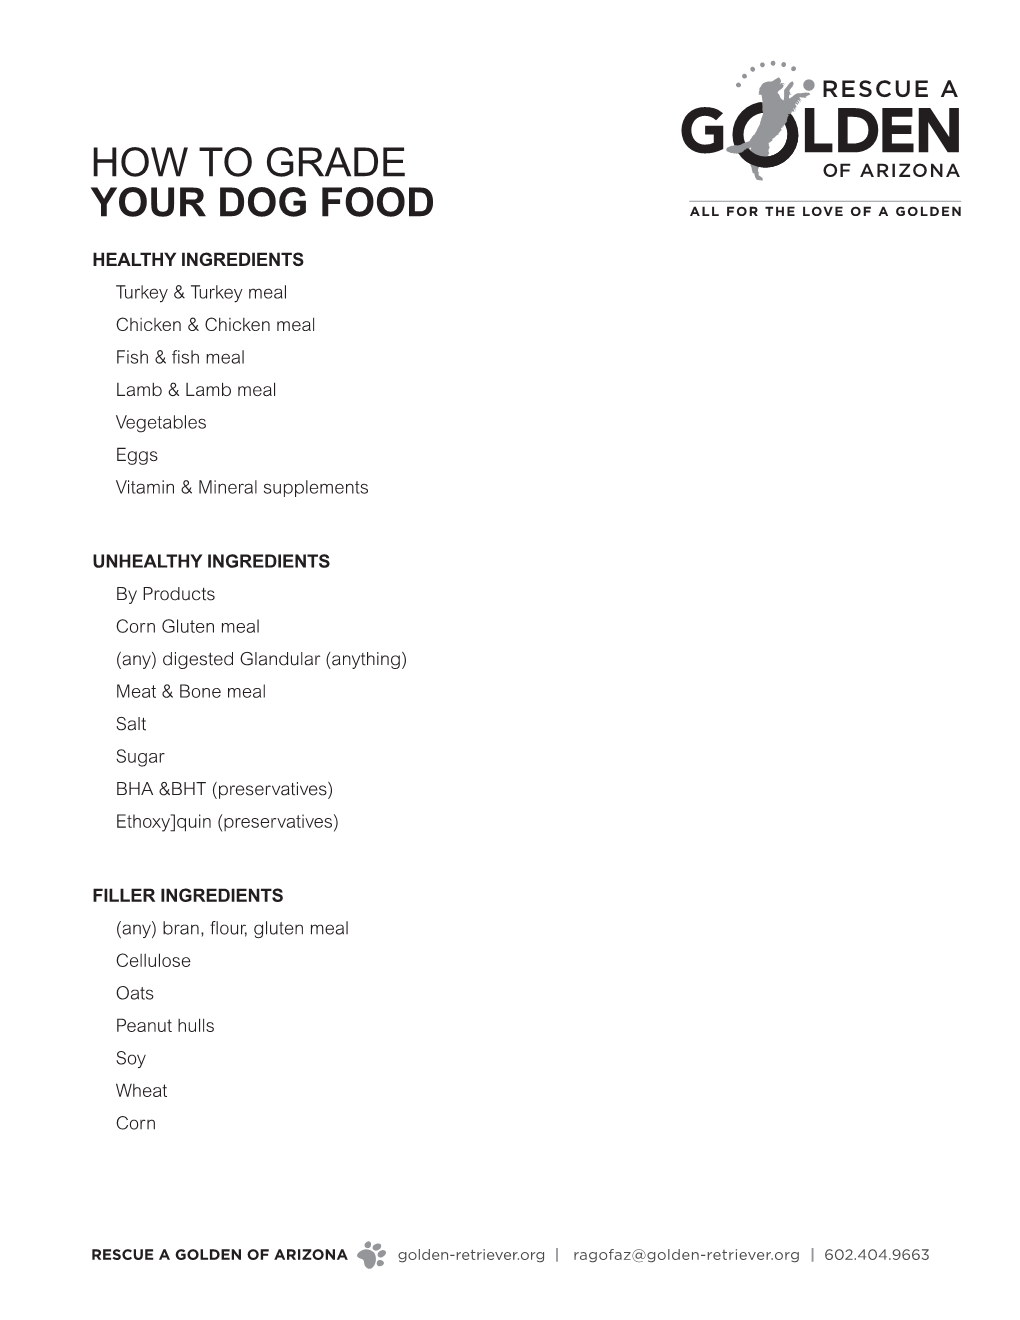 How to Grade Your Dog Food